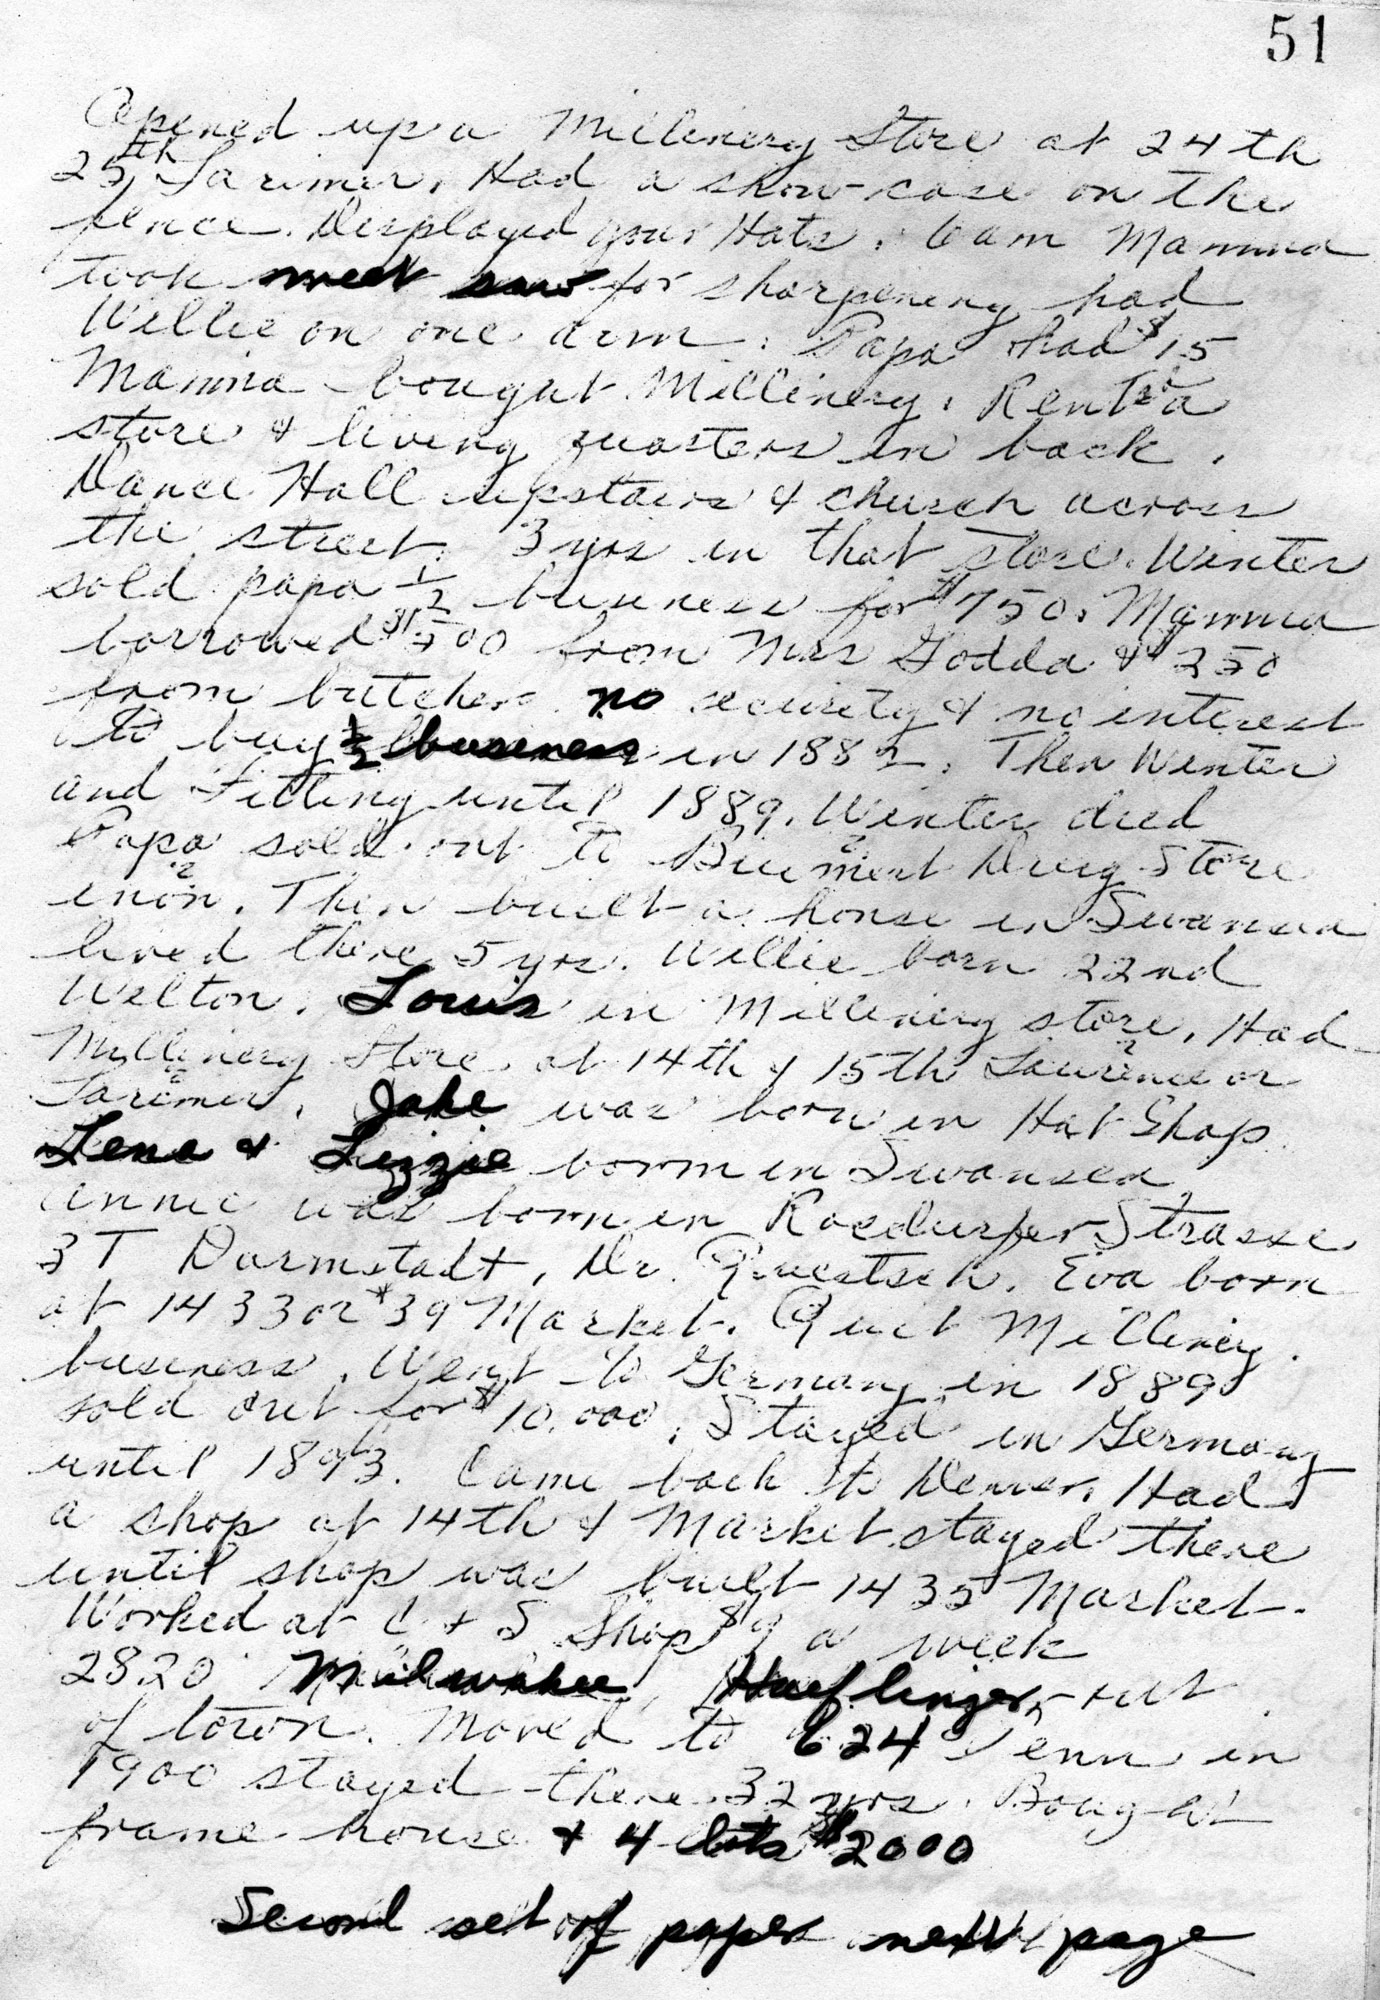 Dauth Family Archive - Elizabeth Fitting Family History Page 19